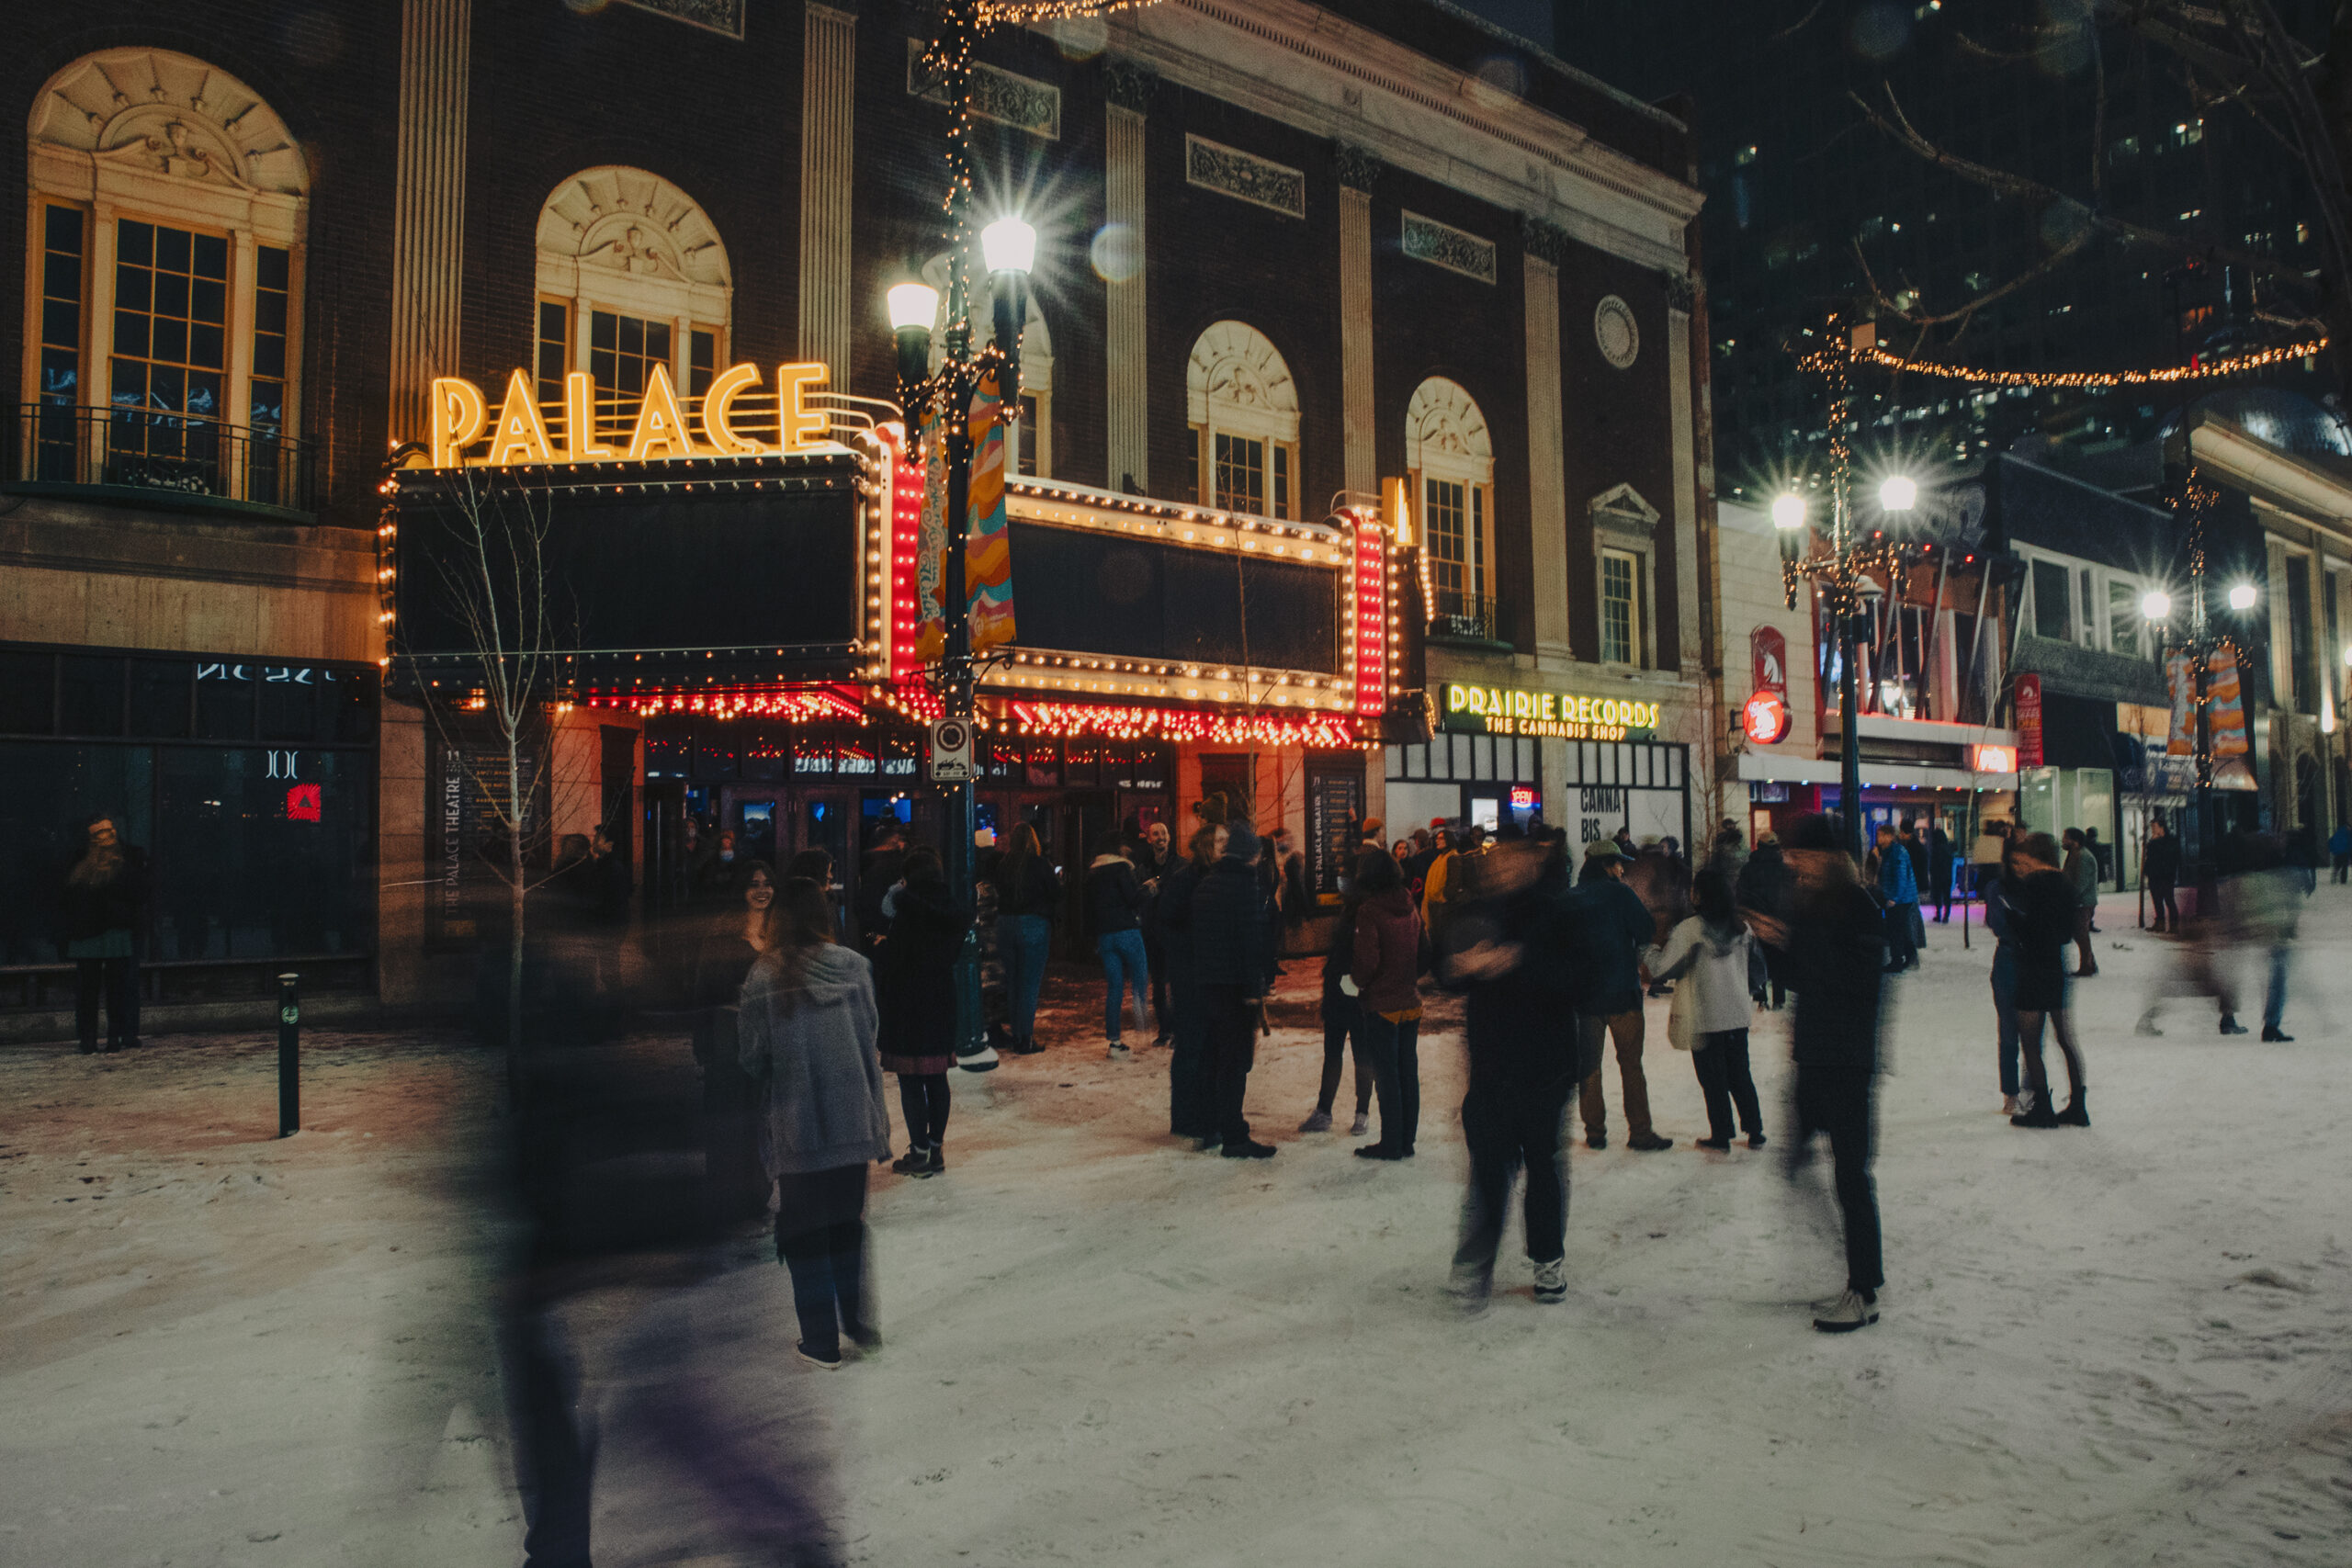 Audience members exit the Palace Theatre into the snowy night.